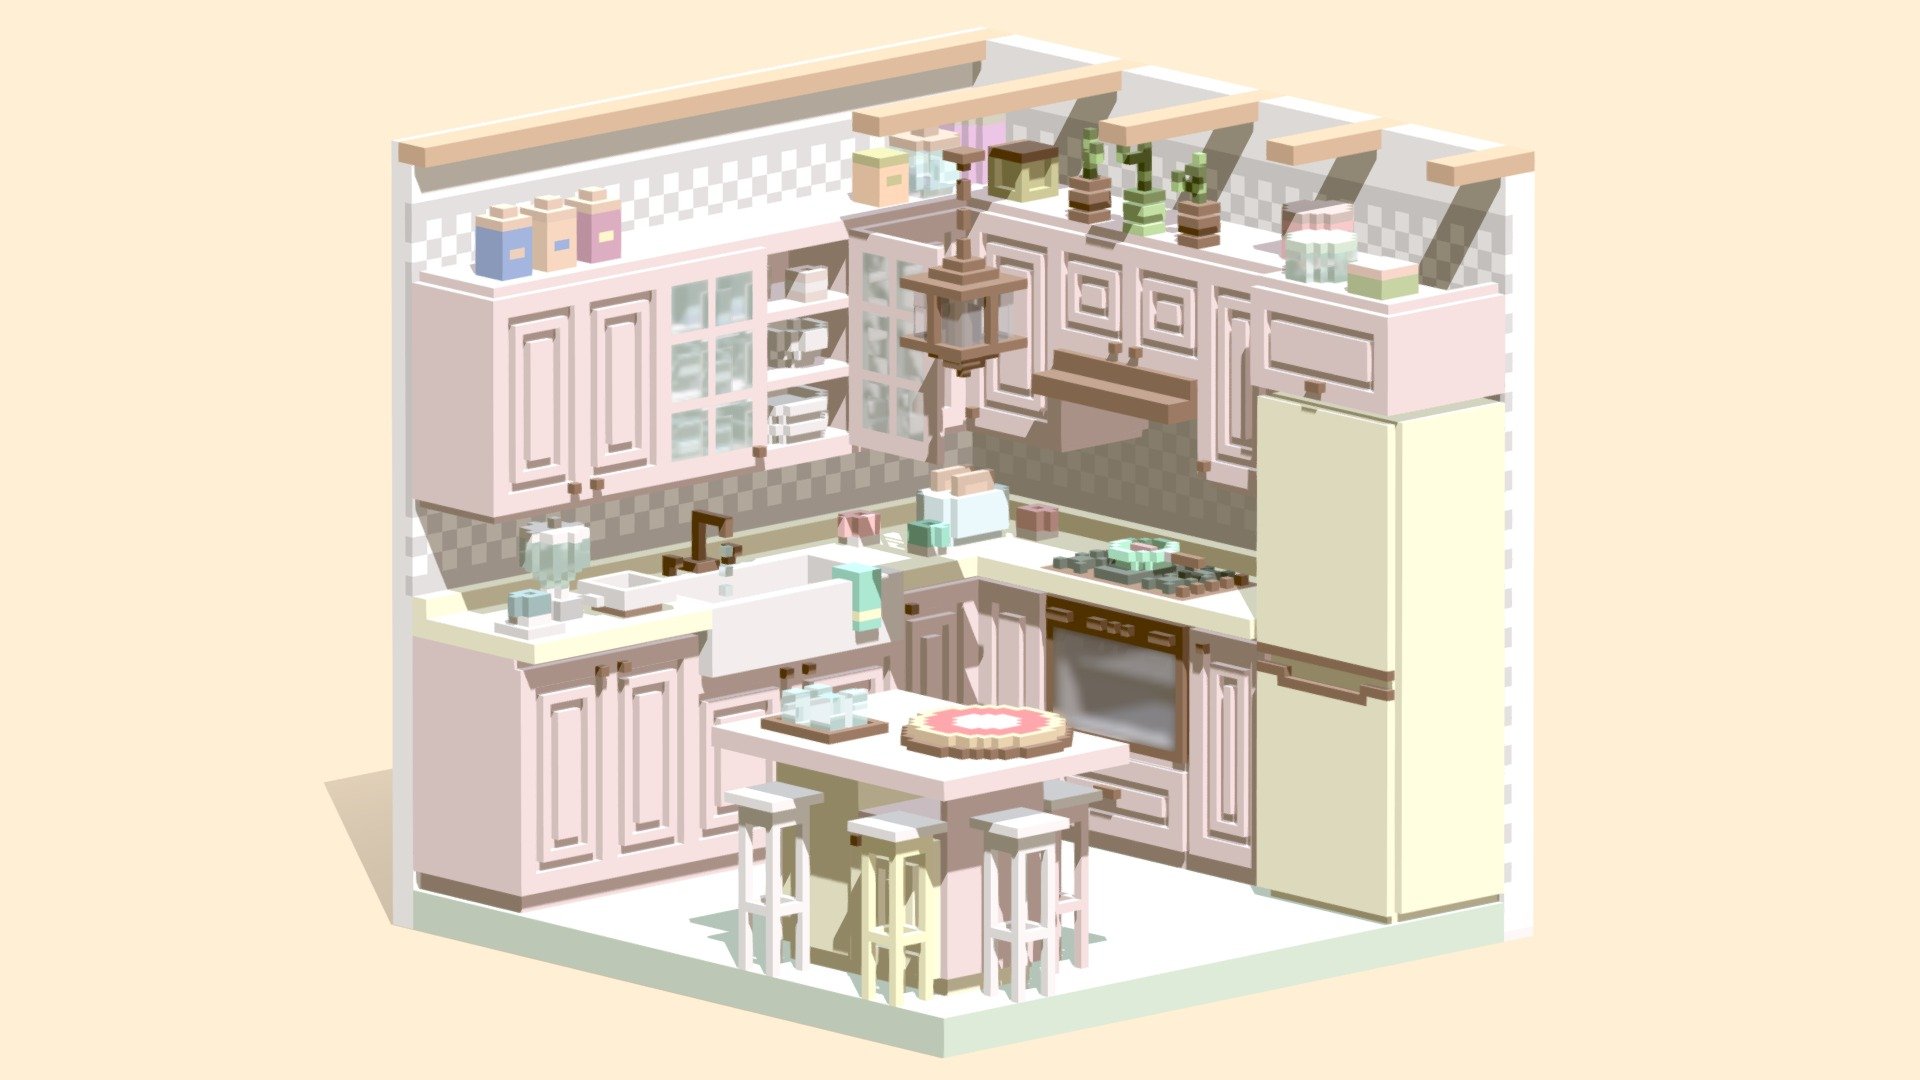 Here you have my adorable isometric kitchen made in Magicavoxel. It's one of my favorite models! 
I hope you like it!

Warning: it may not look the same in Sketchfab as it does in Magicavoxel - Cute Isometric Kitchen Voxel - Buy Royalty Free 3D model by Sora (@dualityart) 3d model